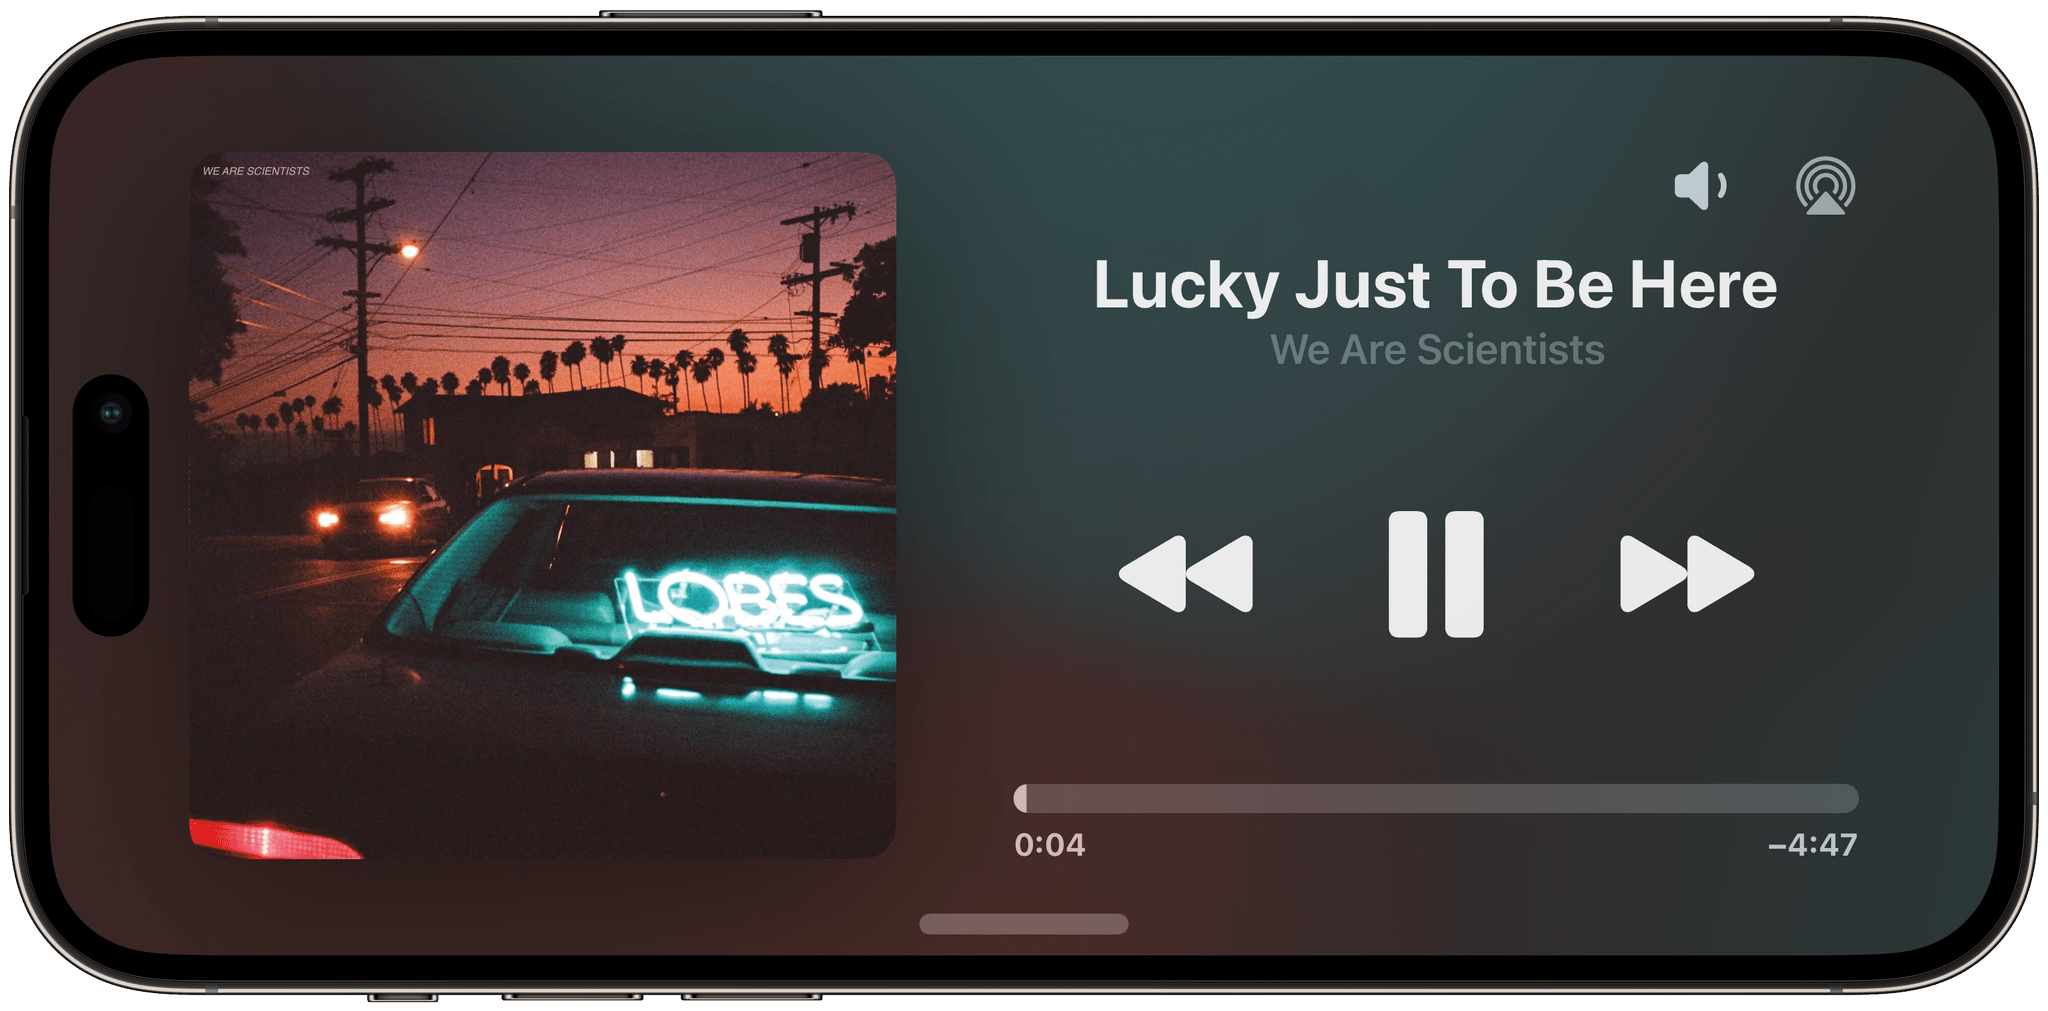 The Now Playing activity in full-screen. It's fair to assume this is what the music playback UI of a HomePod with a screen may look like.